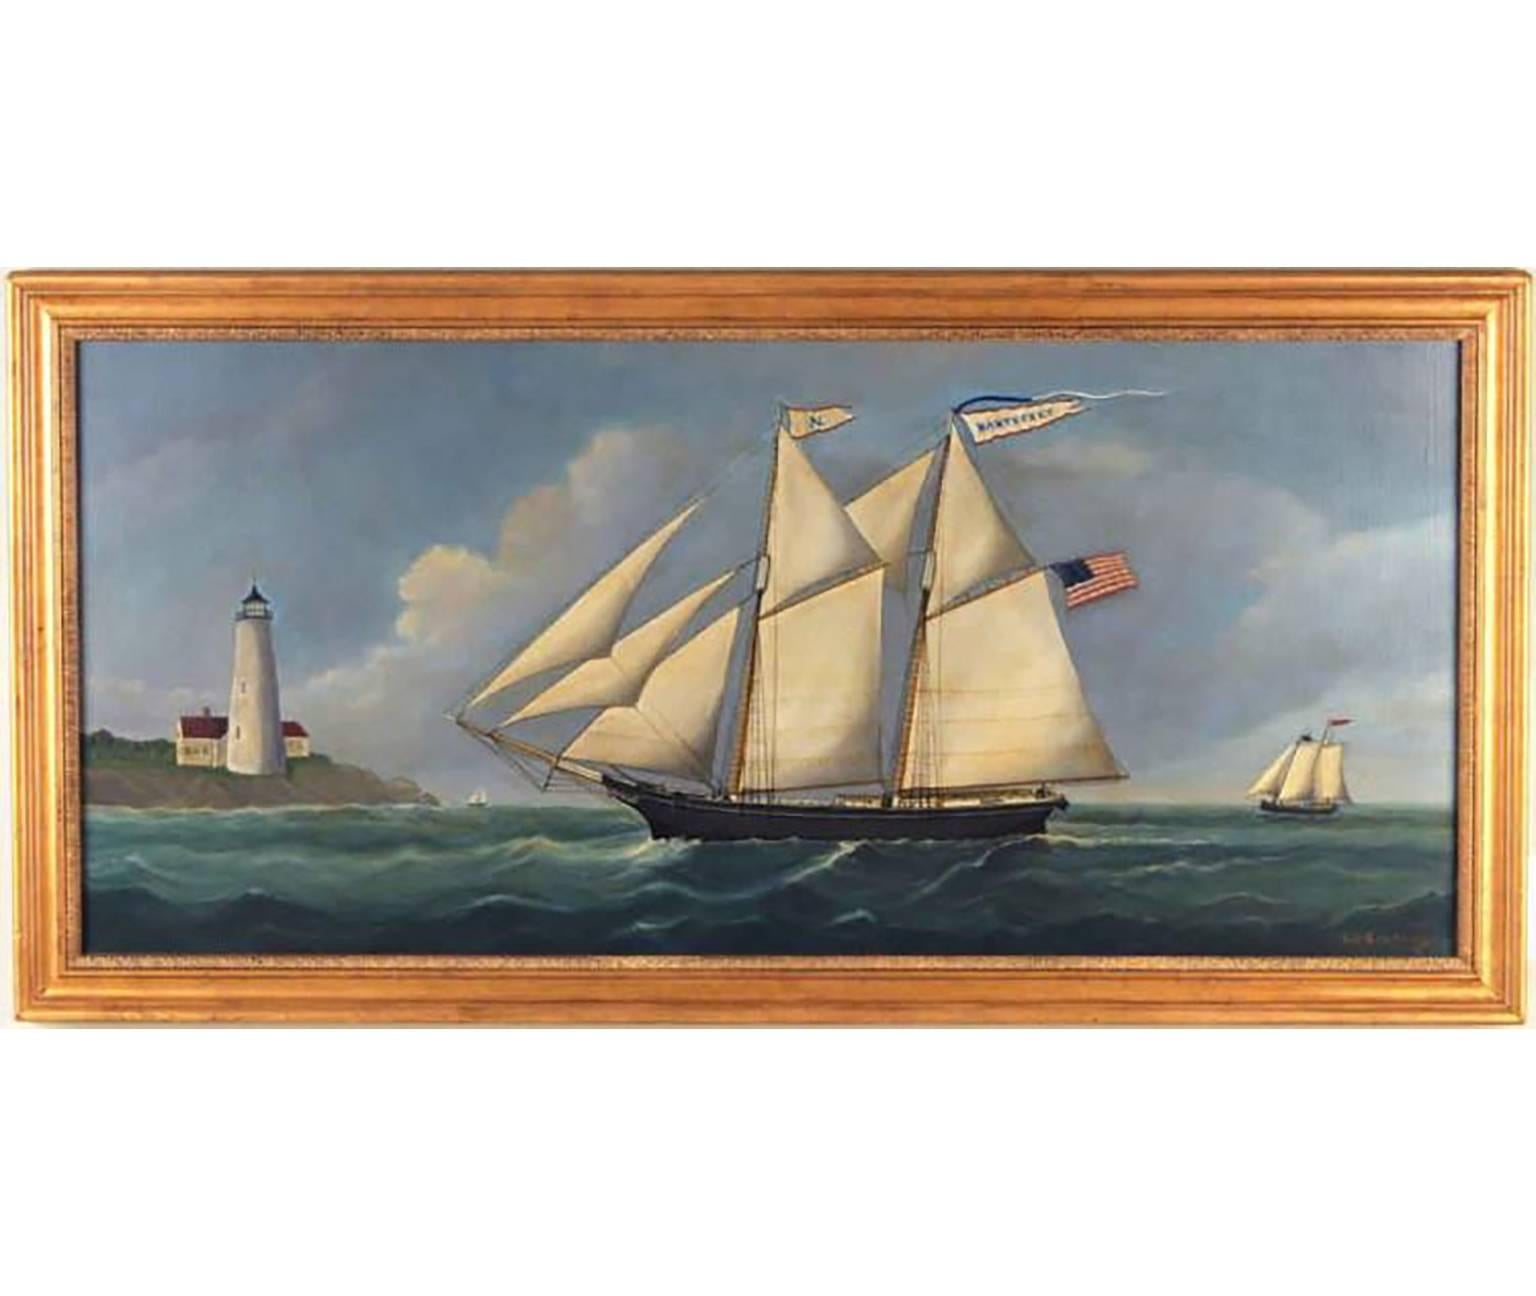 Nautical Oil Painting by Reginald E. Nickerson (American, 1915-1999) Entitled “Nantucket”  Oil on Canvas  Signed by artist in lower right ” R E Nickerson”  Beautiful depiction of the ship Nantucket  A marine artist and ship painter, Nickerson